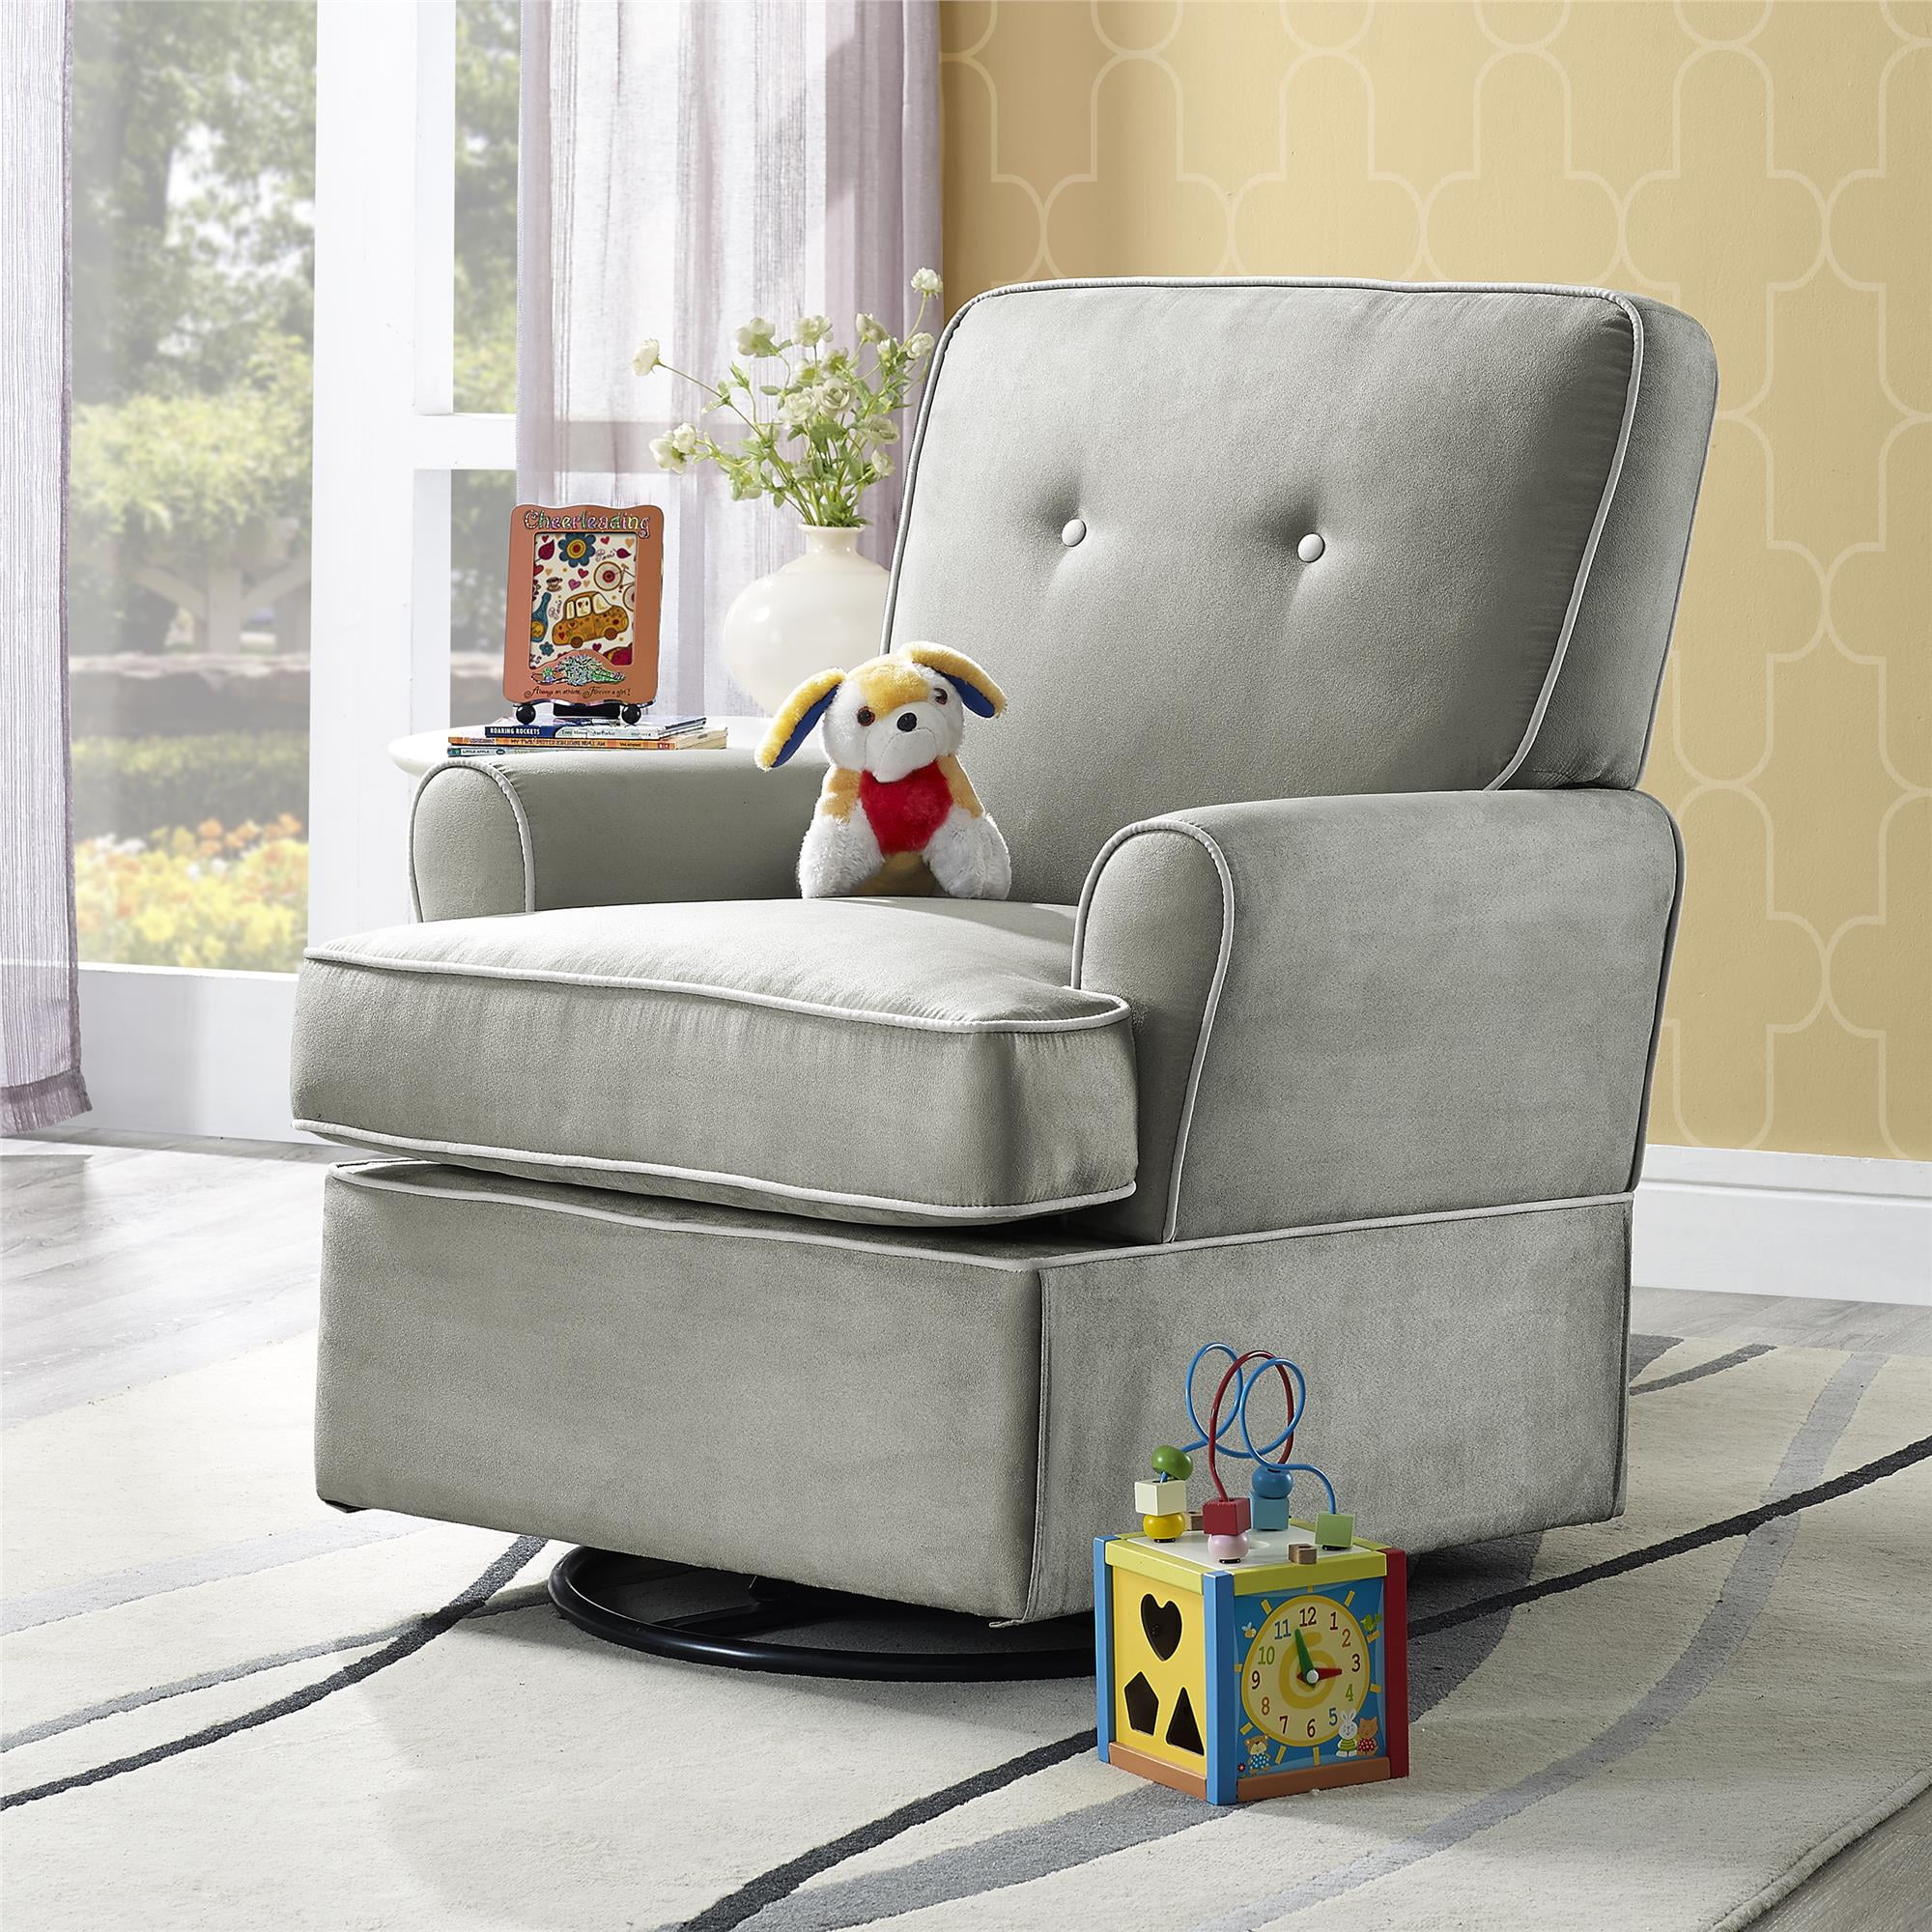 Graco Parker Semi-Upholstered Glider and Nursing Ottoman Cherry/Beige Cleanable Upholstered Comfort Rocking Nursery Chair with Ottoman 